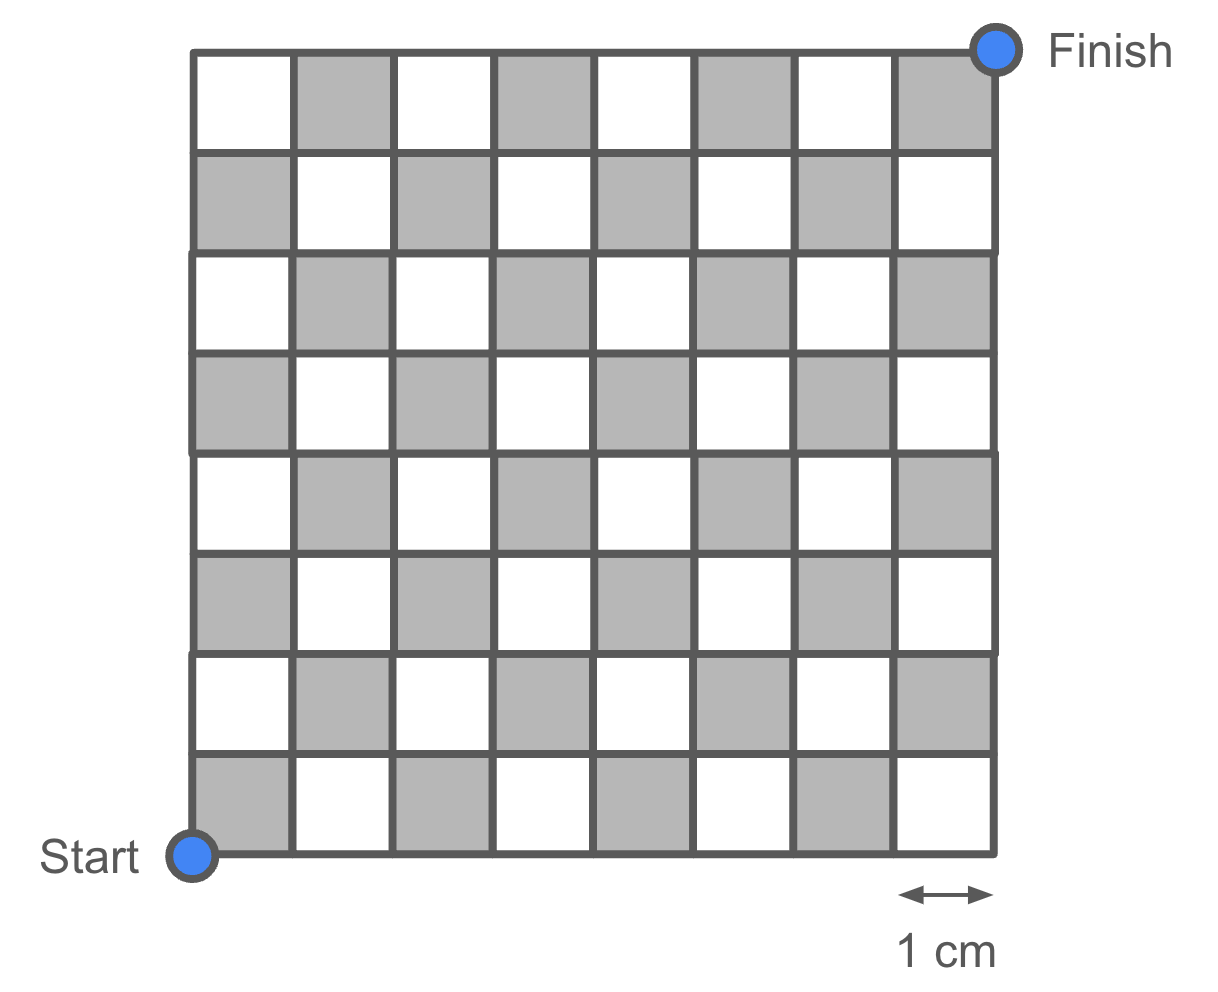 An 8x8 chess board with square side length 1 cm. The bottom left square is black. Start is in the bottom left, and Finish is at the top right.